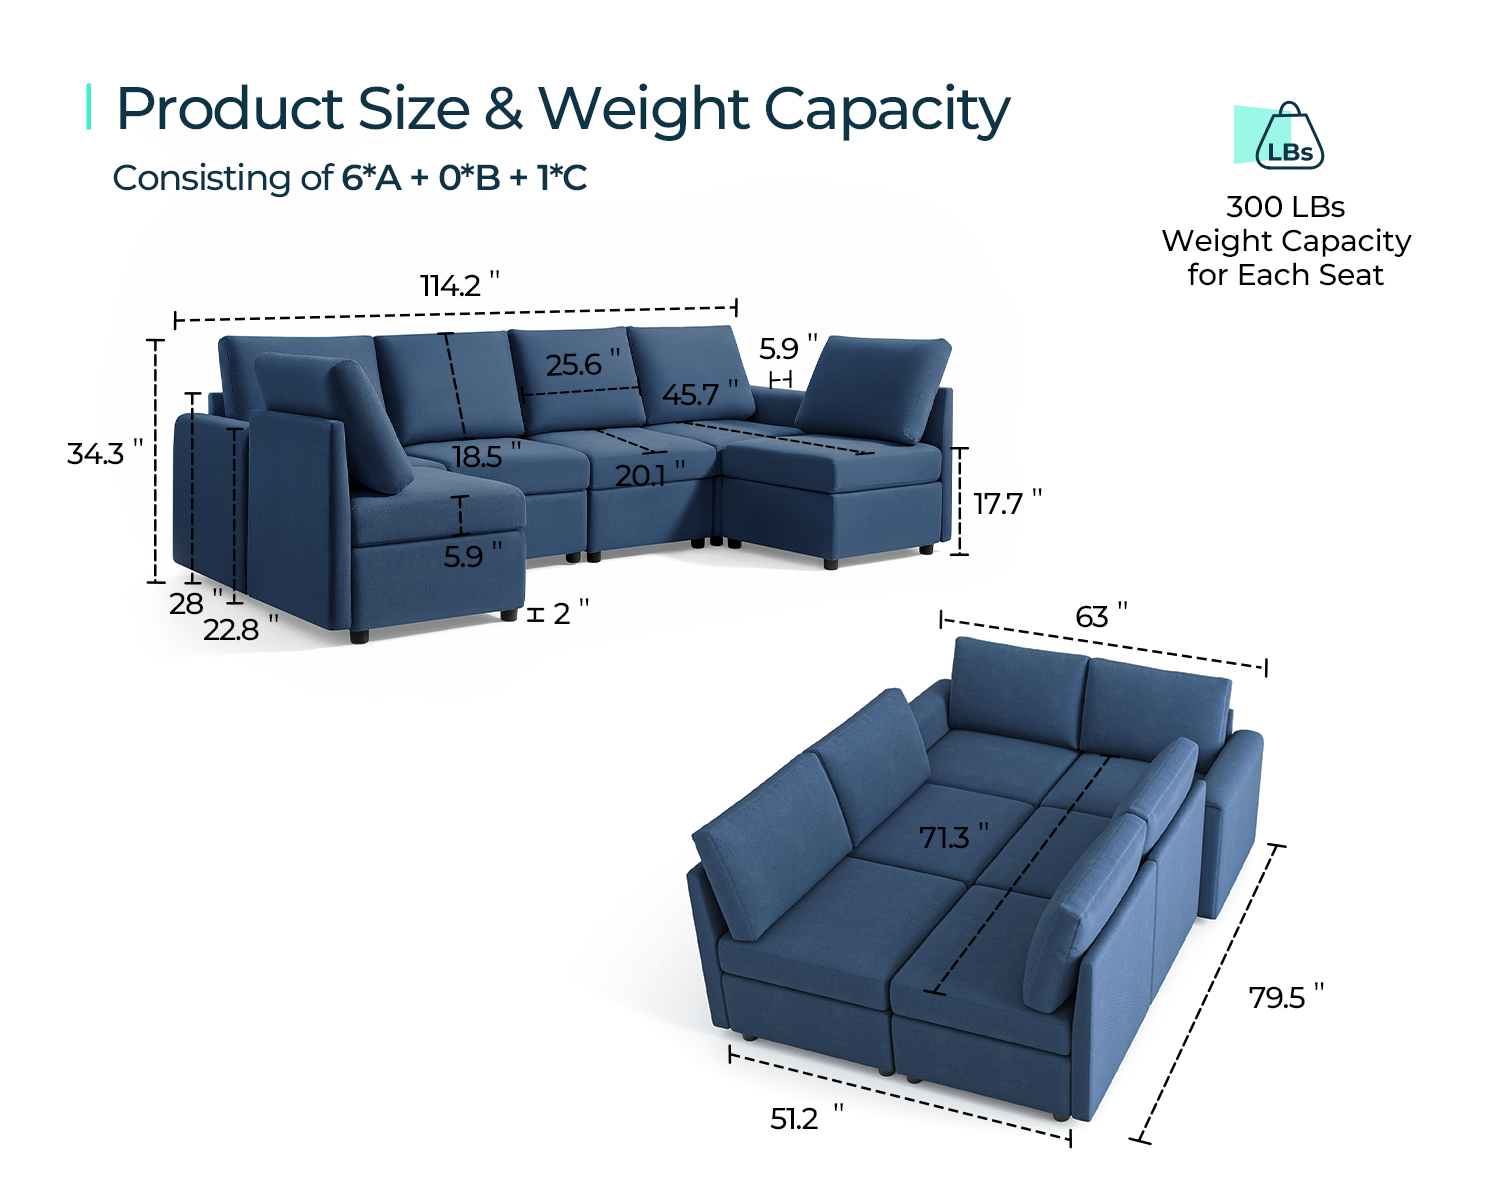 LINSY HOME Modular Couches and Sofas Sectional with Storage Sectional Sofa U Shaped Sectional Couch with Reversible Chaises, Blue - image 3 of 11